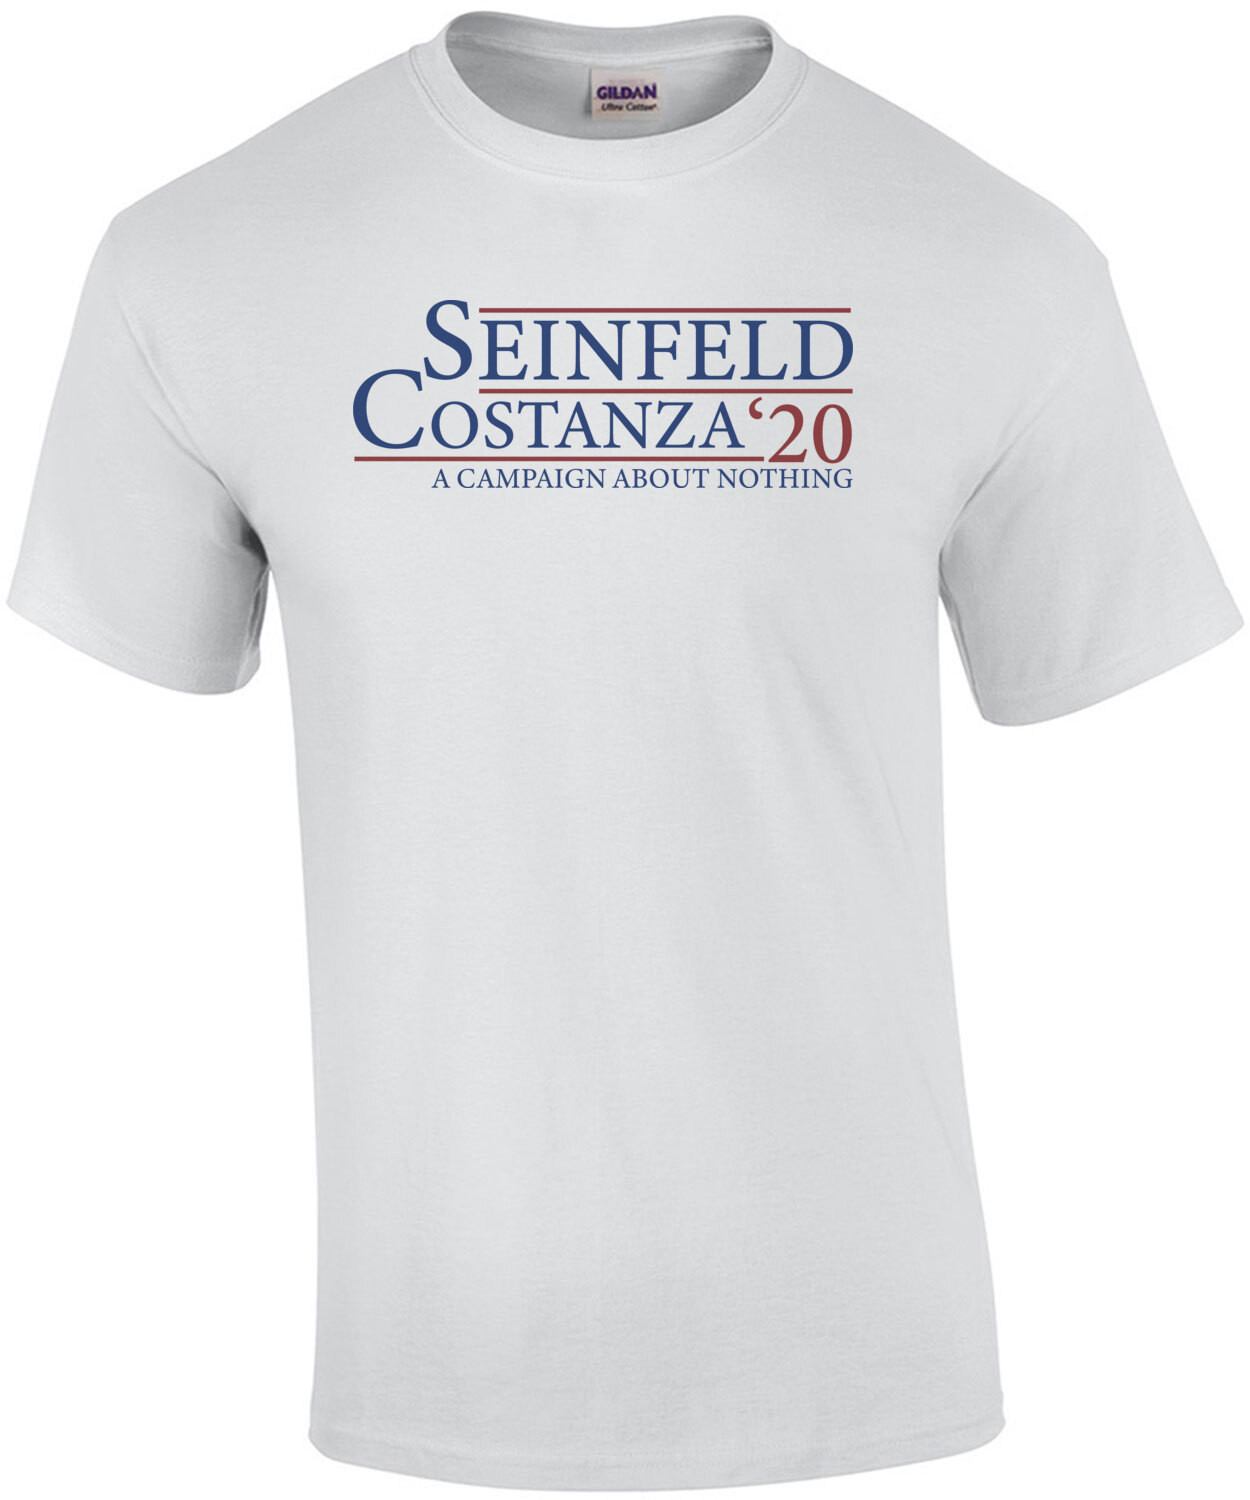 Seinfeld Costanza 2020 - A campaign about nothing - funny seinfeld election 2020 t-shirt